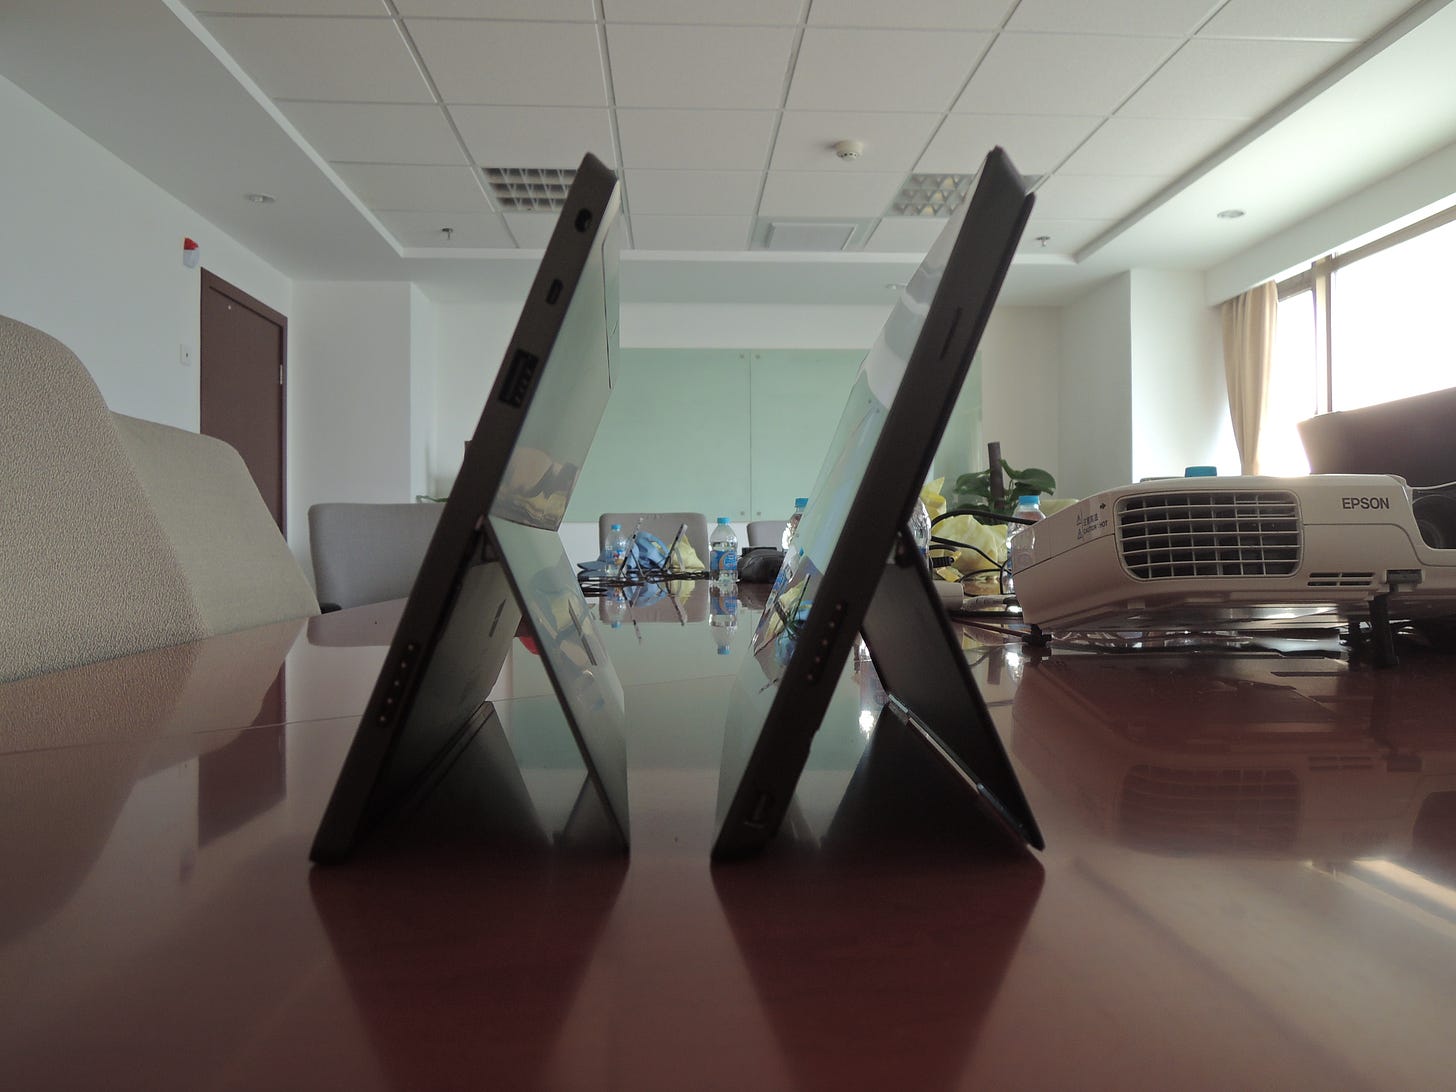 Surface and Surface Pro, or GT and GTX. Both are positioned on a conference room table with the kickstands out. It can be seen that GTX is much thicker than GT.